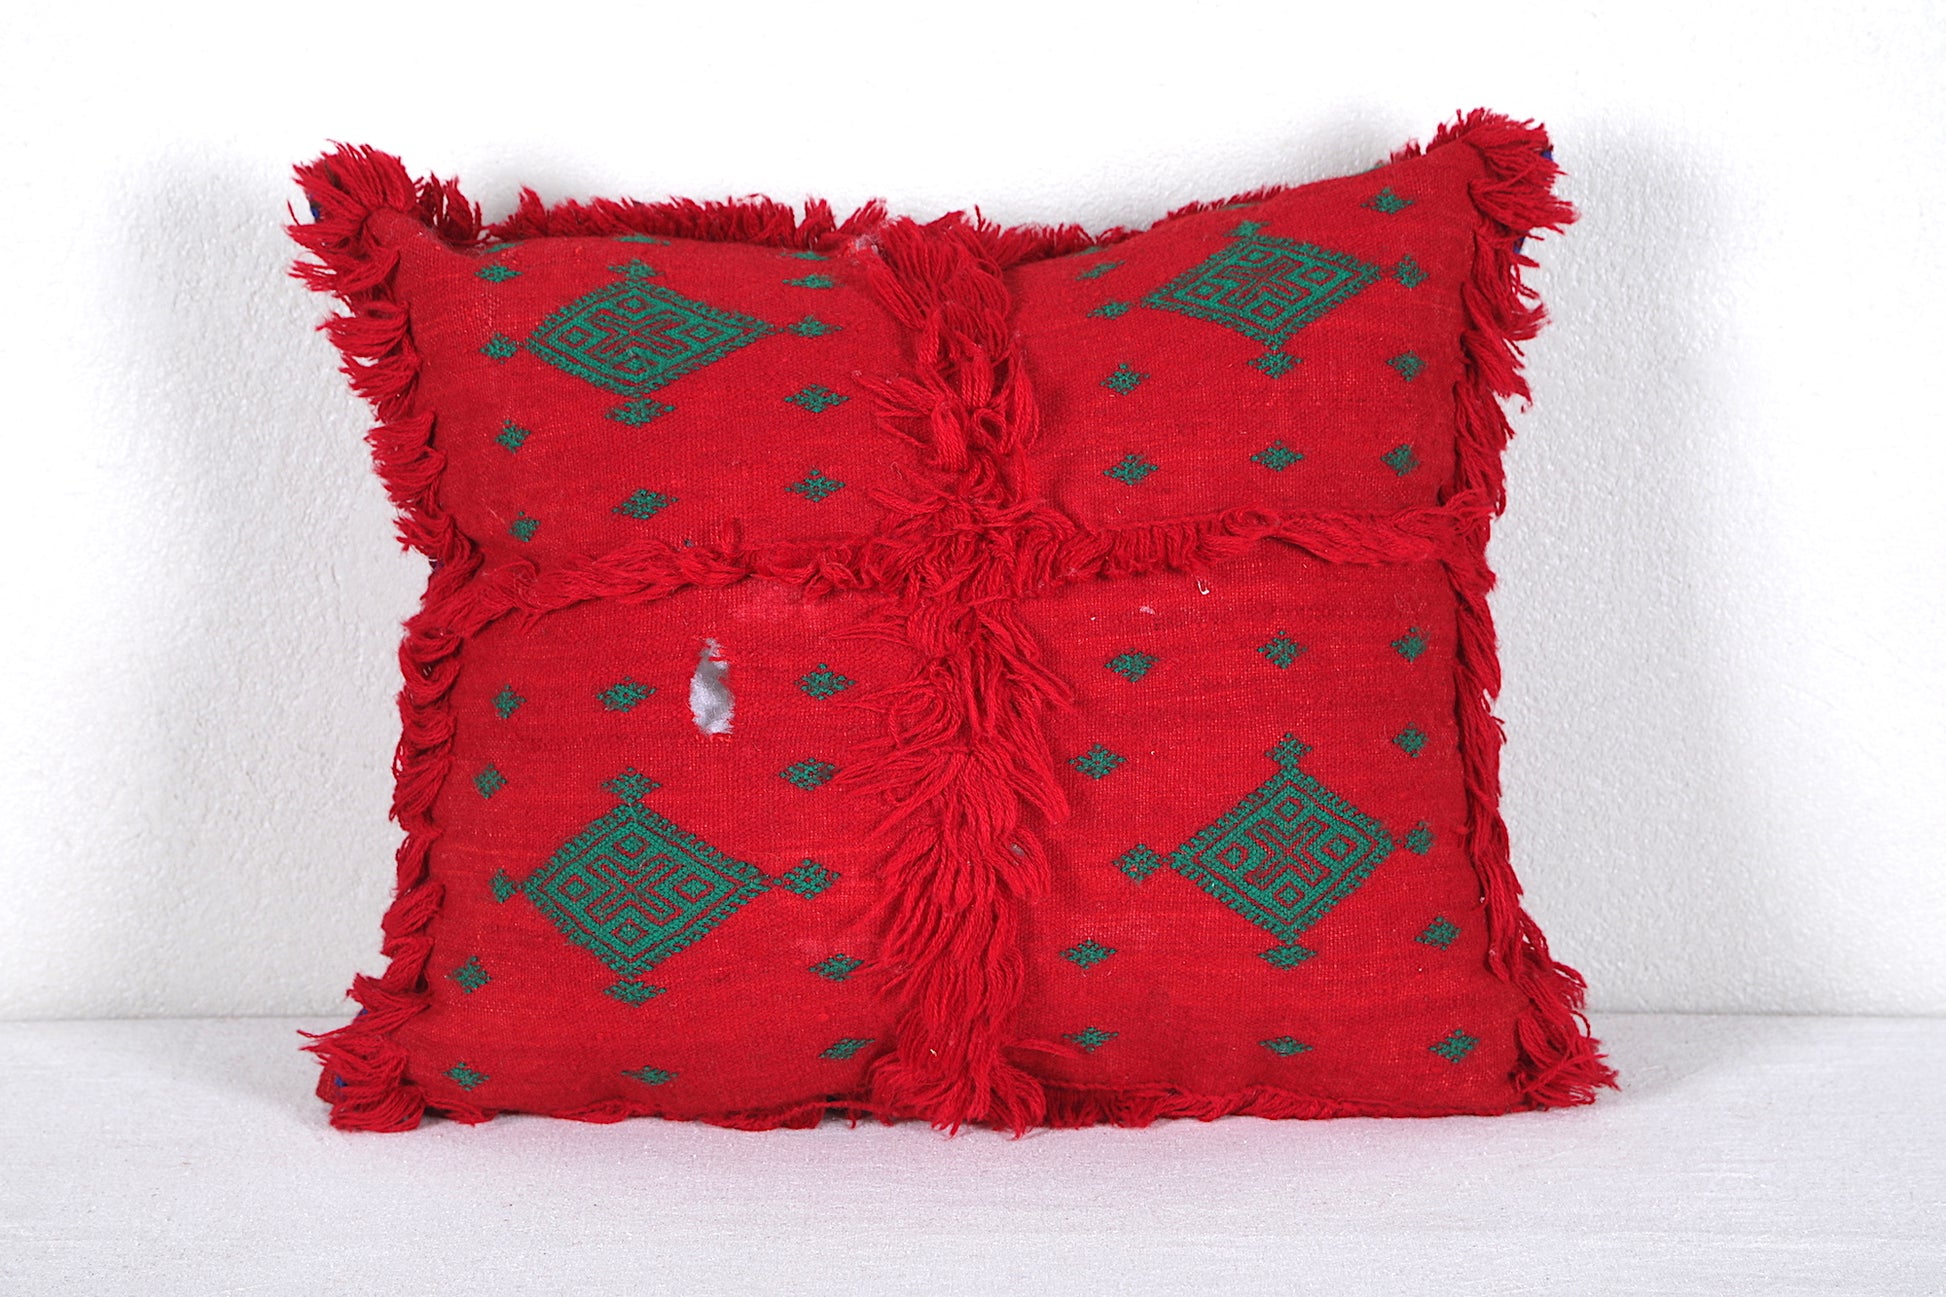 Moroccan red Pillow 14.9 INCHES X 18.1 INCHES